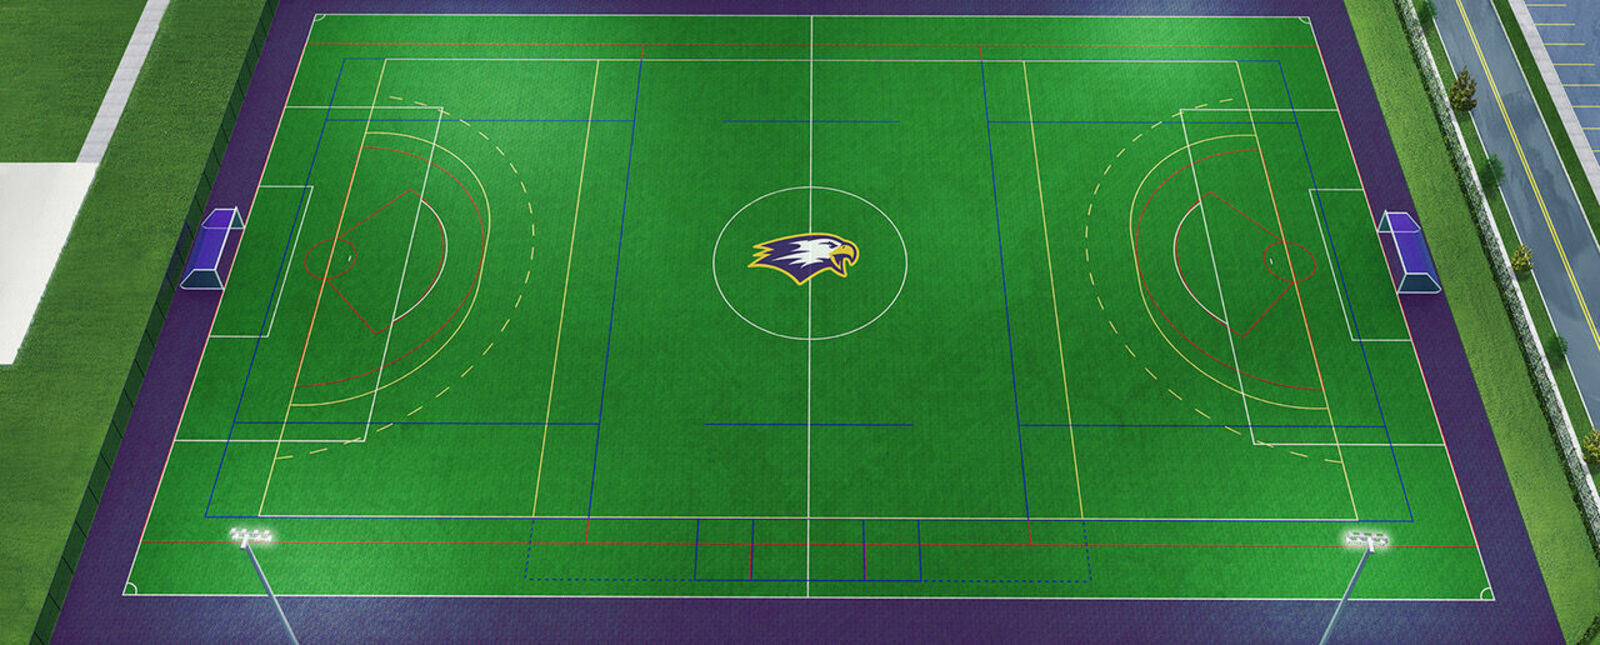 An artist rendering of the proposed turf field at 埃尔迈拉大学